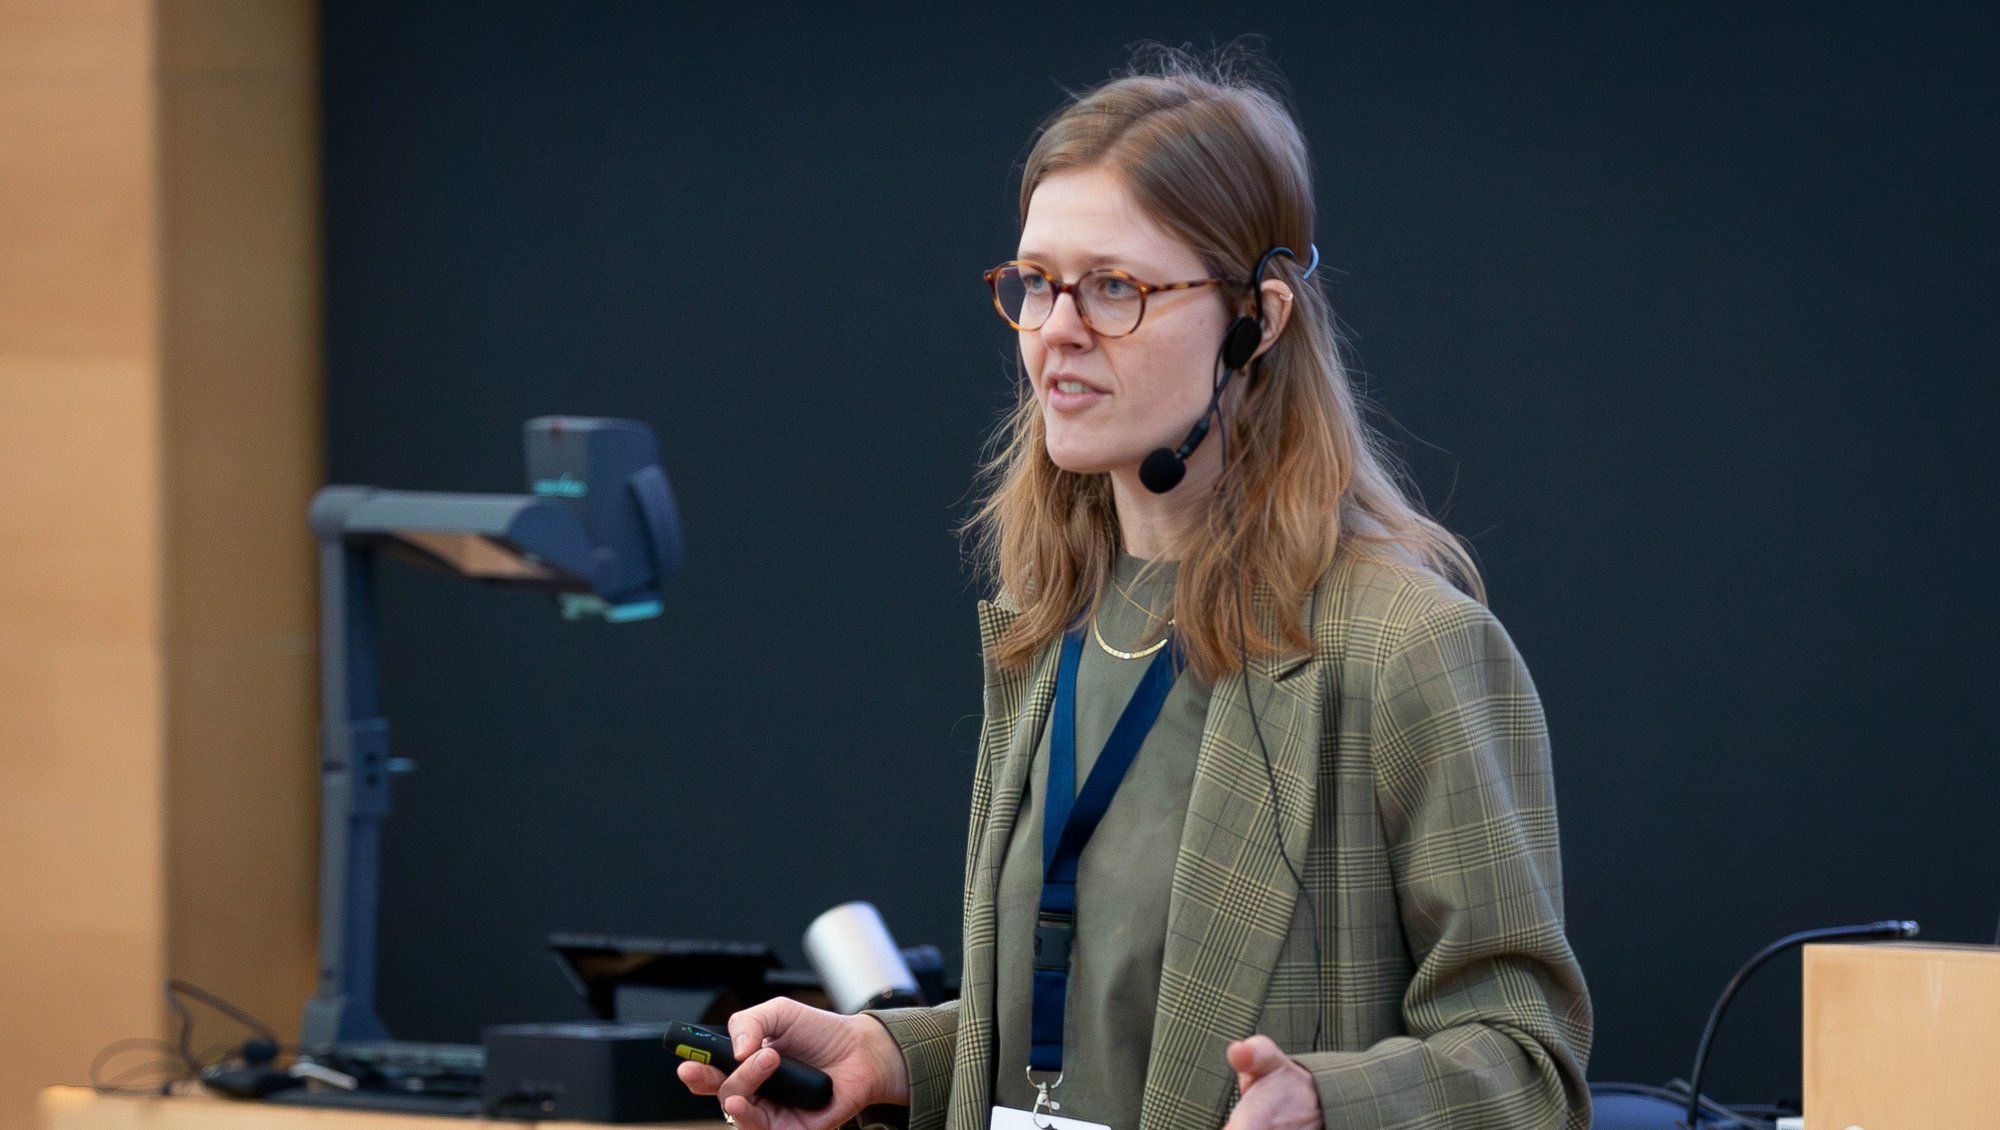 Ph.D. student Caroline Juhl Arnbjerg from the Department of Public Health wins the honor this year and the Fogh-Nielsen main prize of 75,000 DKK. Photo: Sebastian Skousgaard, AU Health.